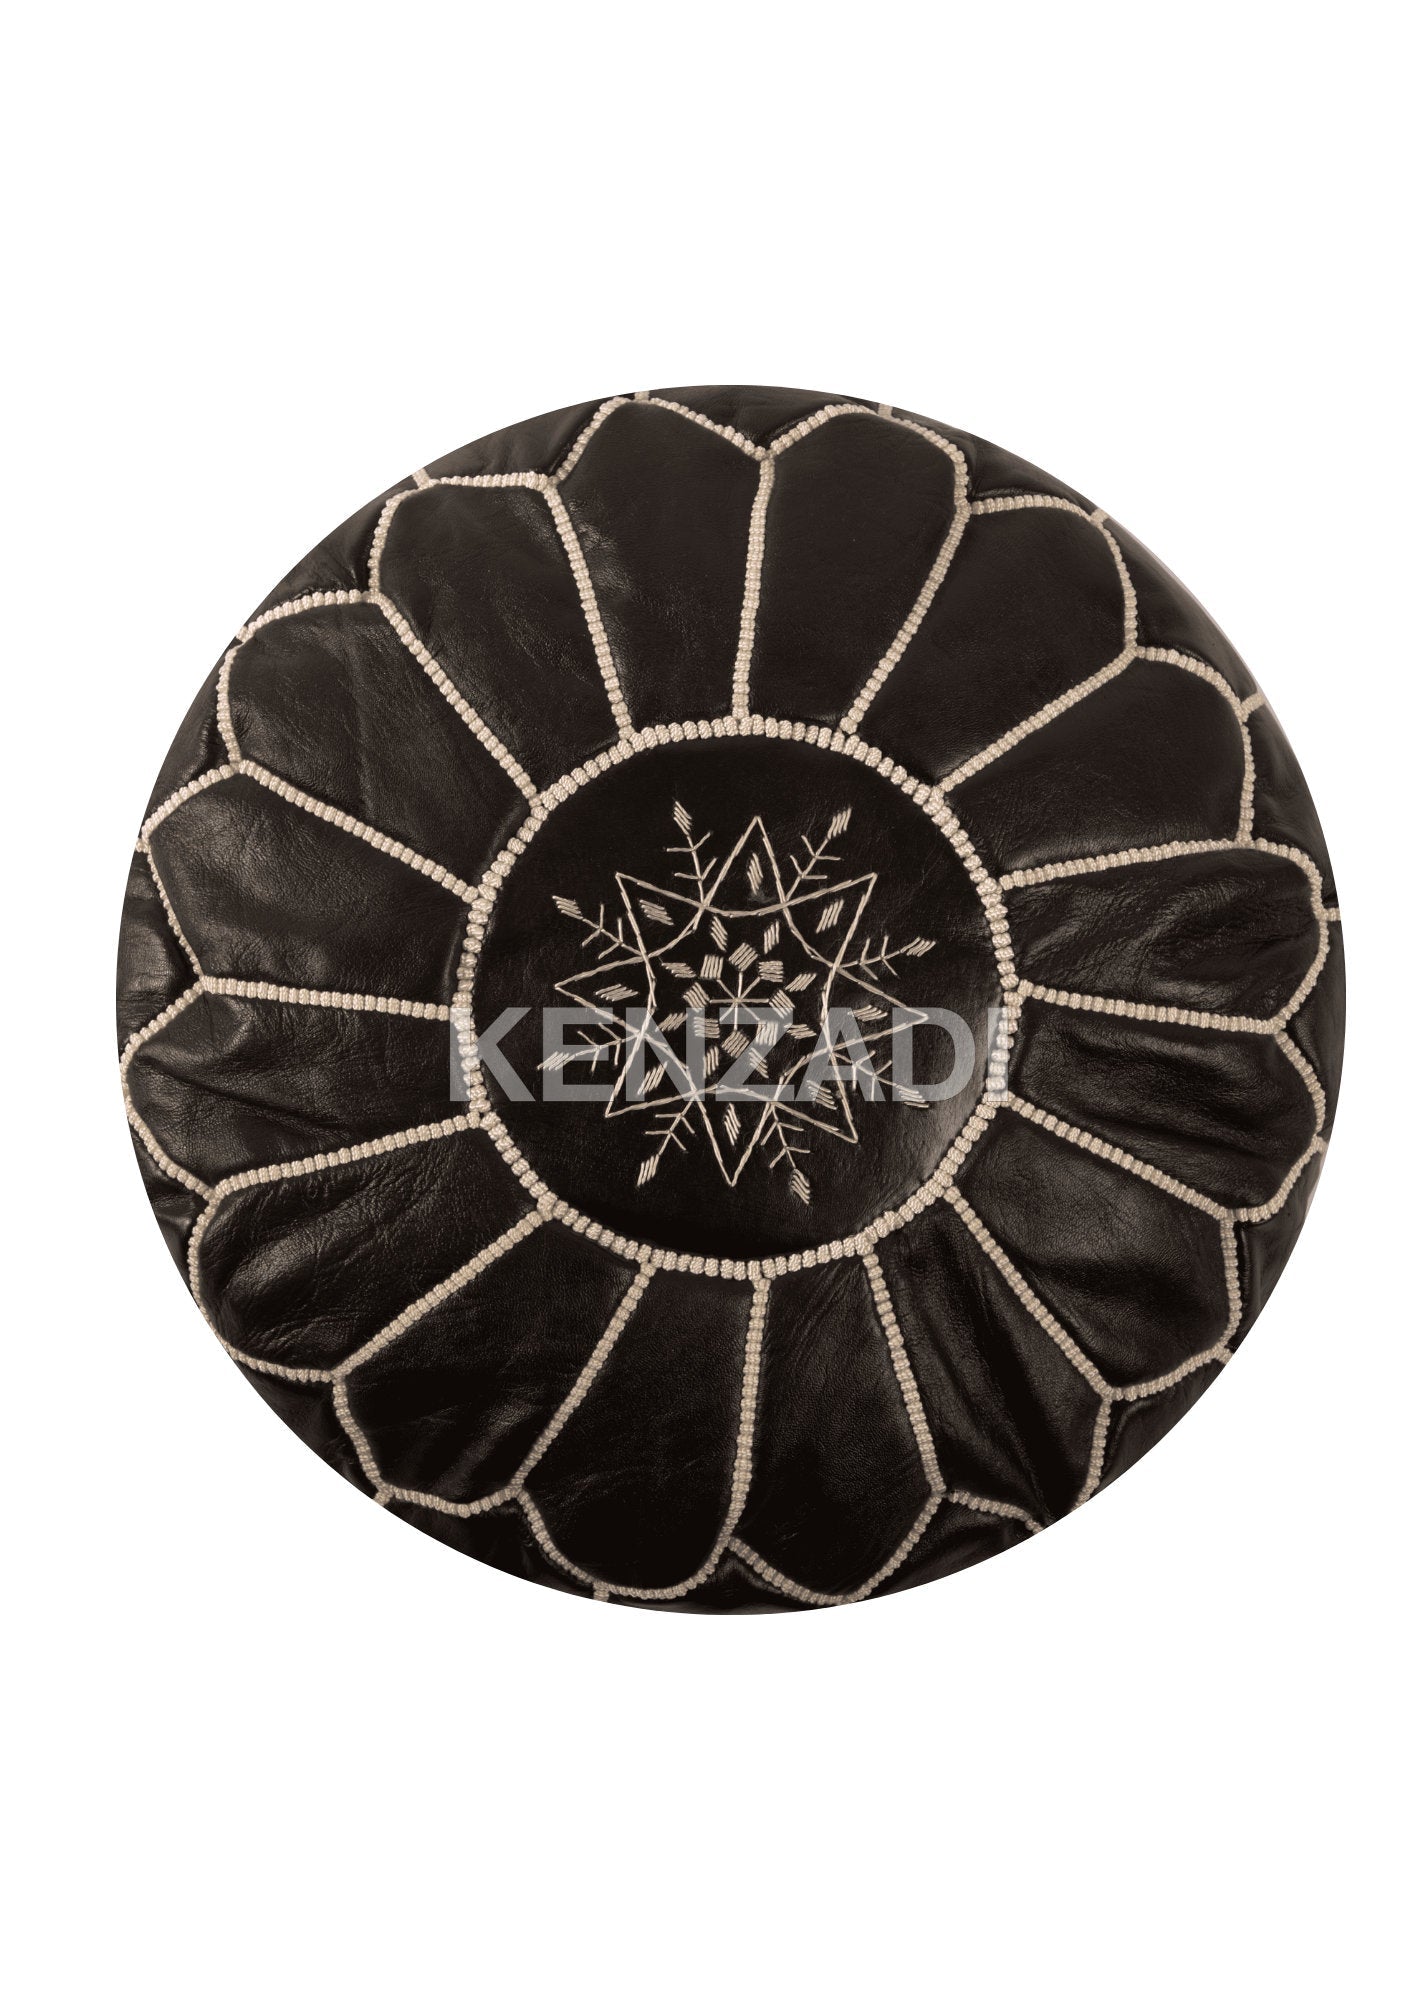 Authentic Moroccan leather pouf with black and beige embroidery. Hand-sewn, round pouf made from premium Berber leather. Perfect for adding a bohemian touch to your décor.